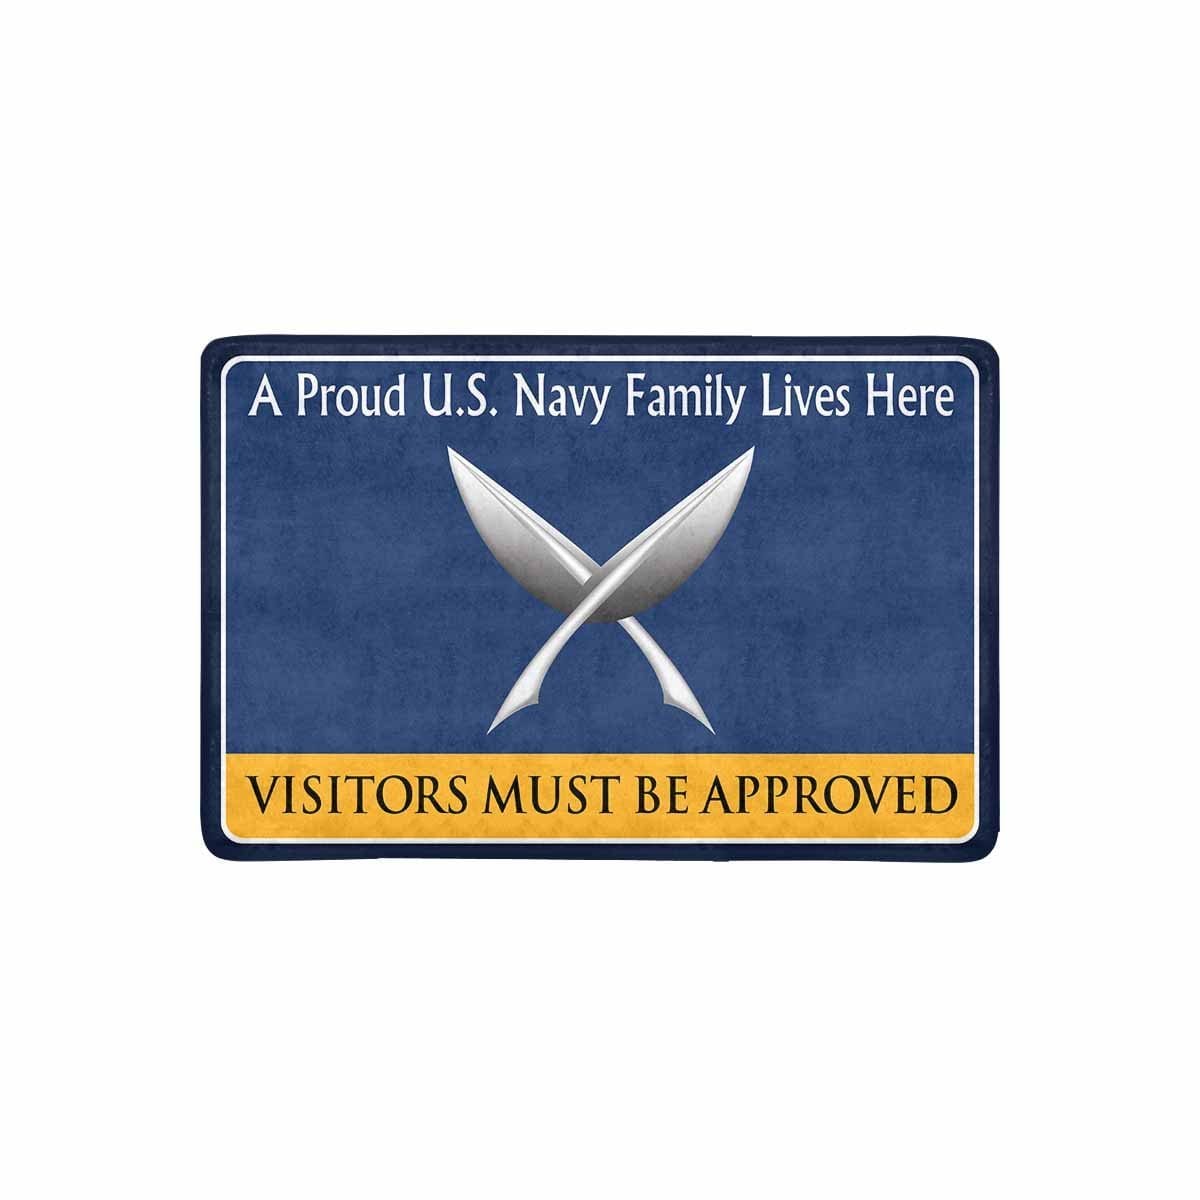 U.S Navy Yeoman Navy YN Family Doormat - Visitors must be approved (23,6 inches x 15,7 inches)-Doormat-Navy-Rate-Veterans Nation